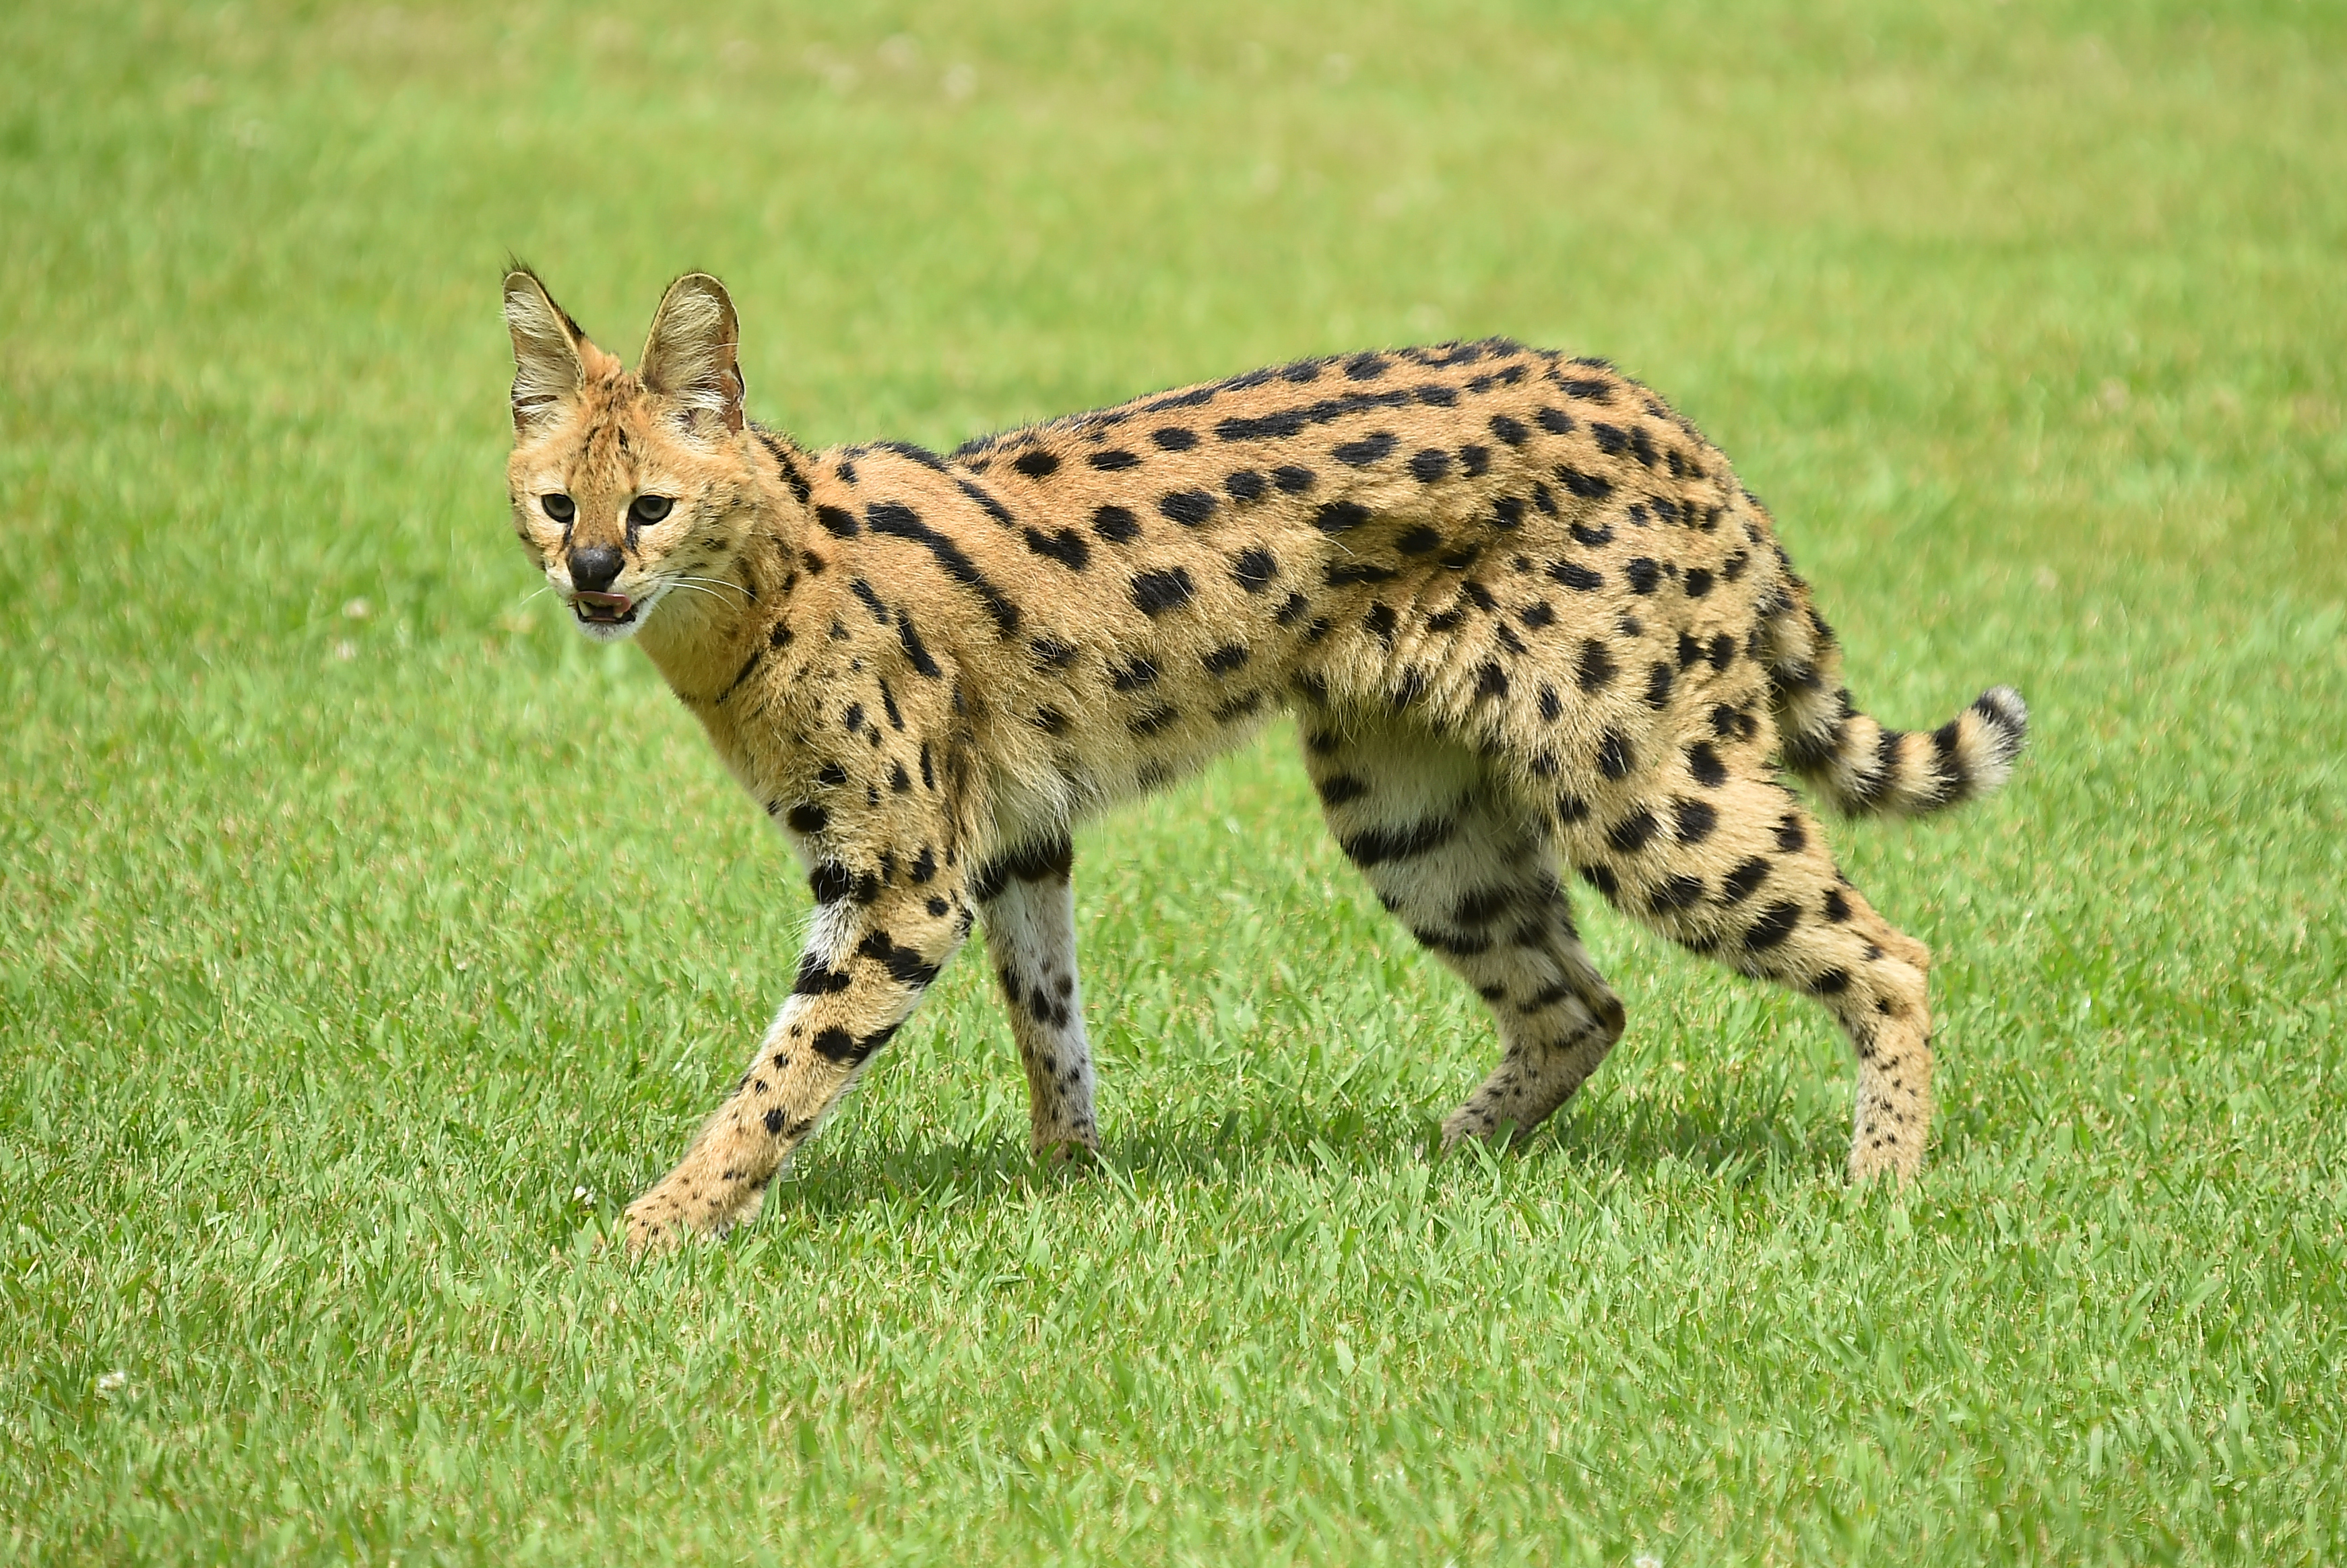 Serval cat in the grass